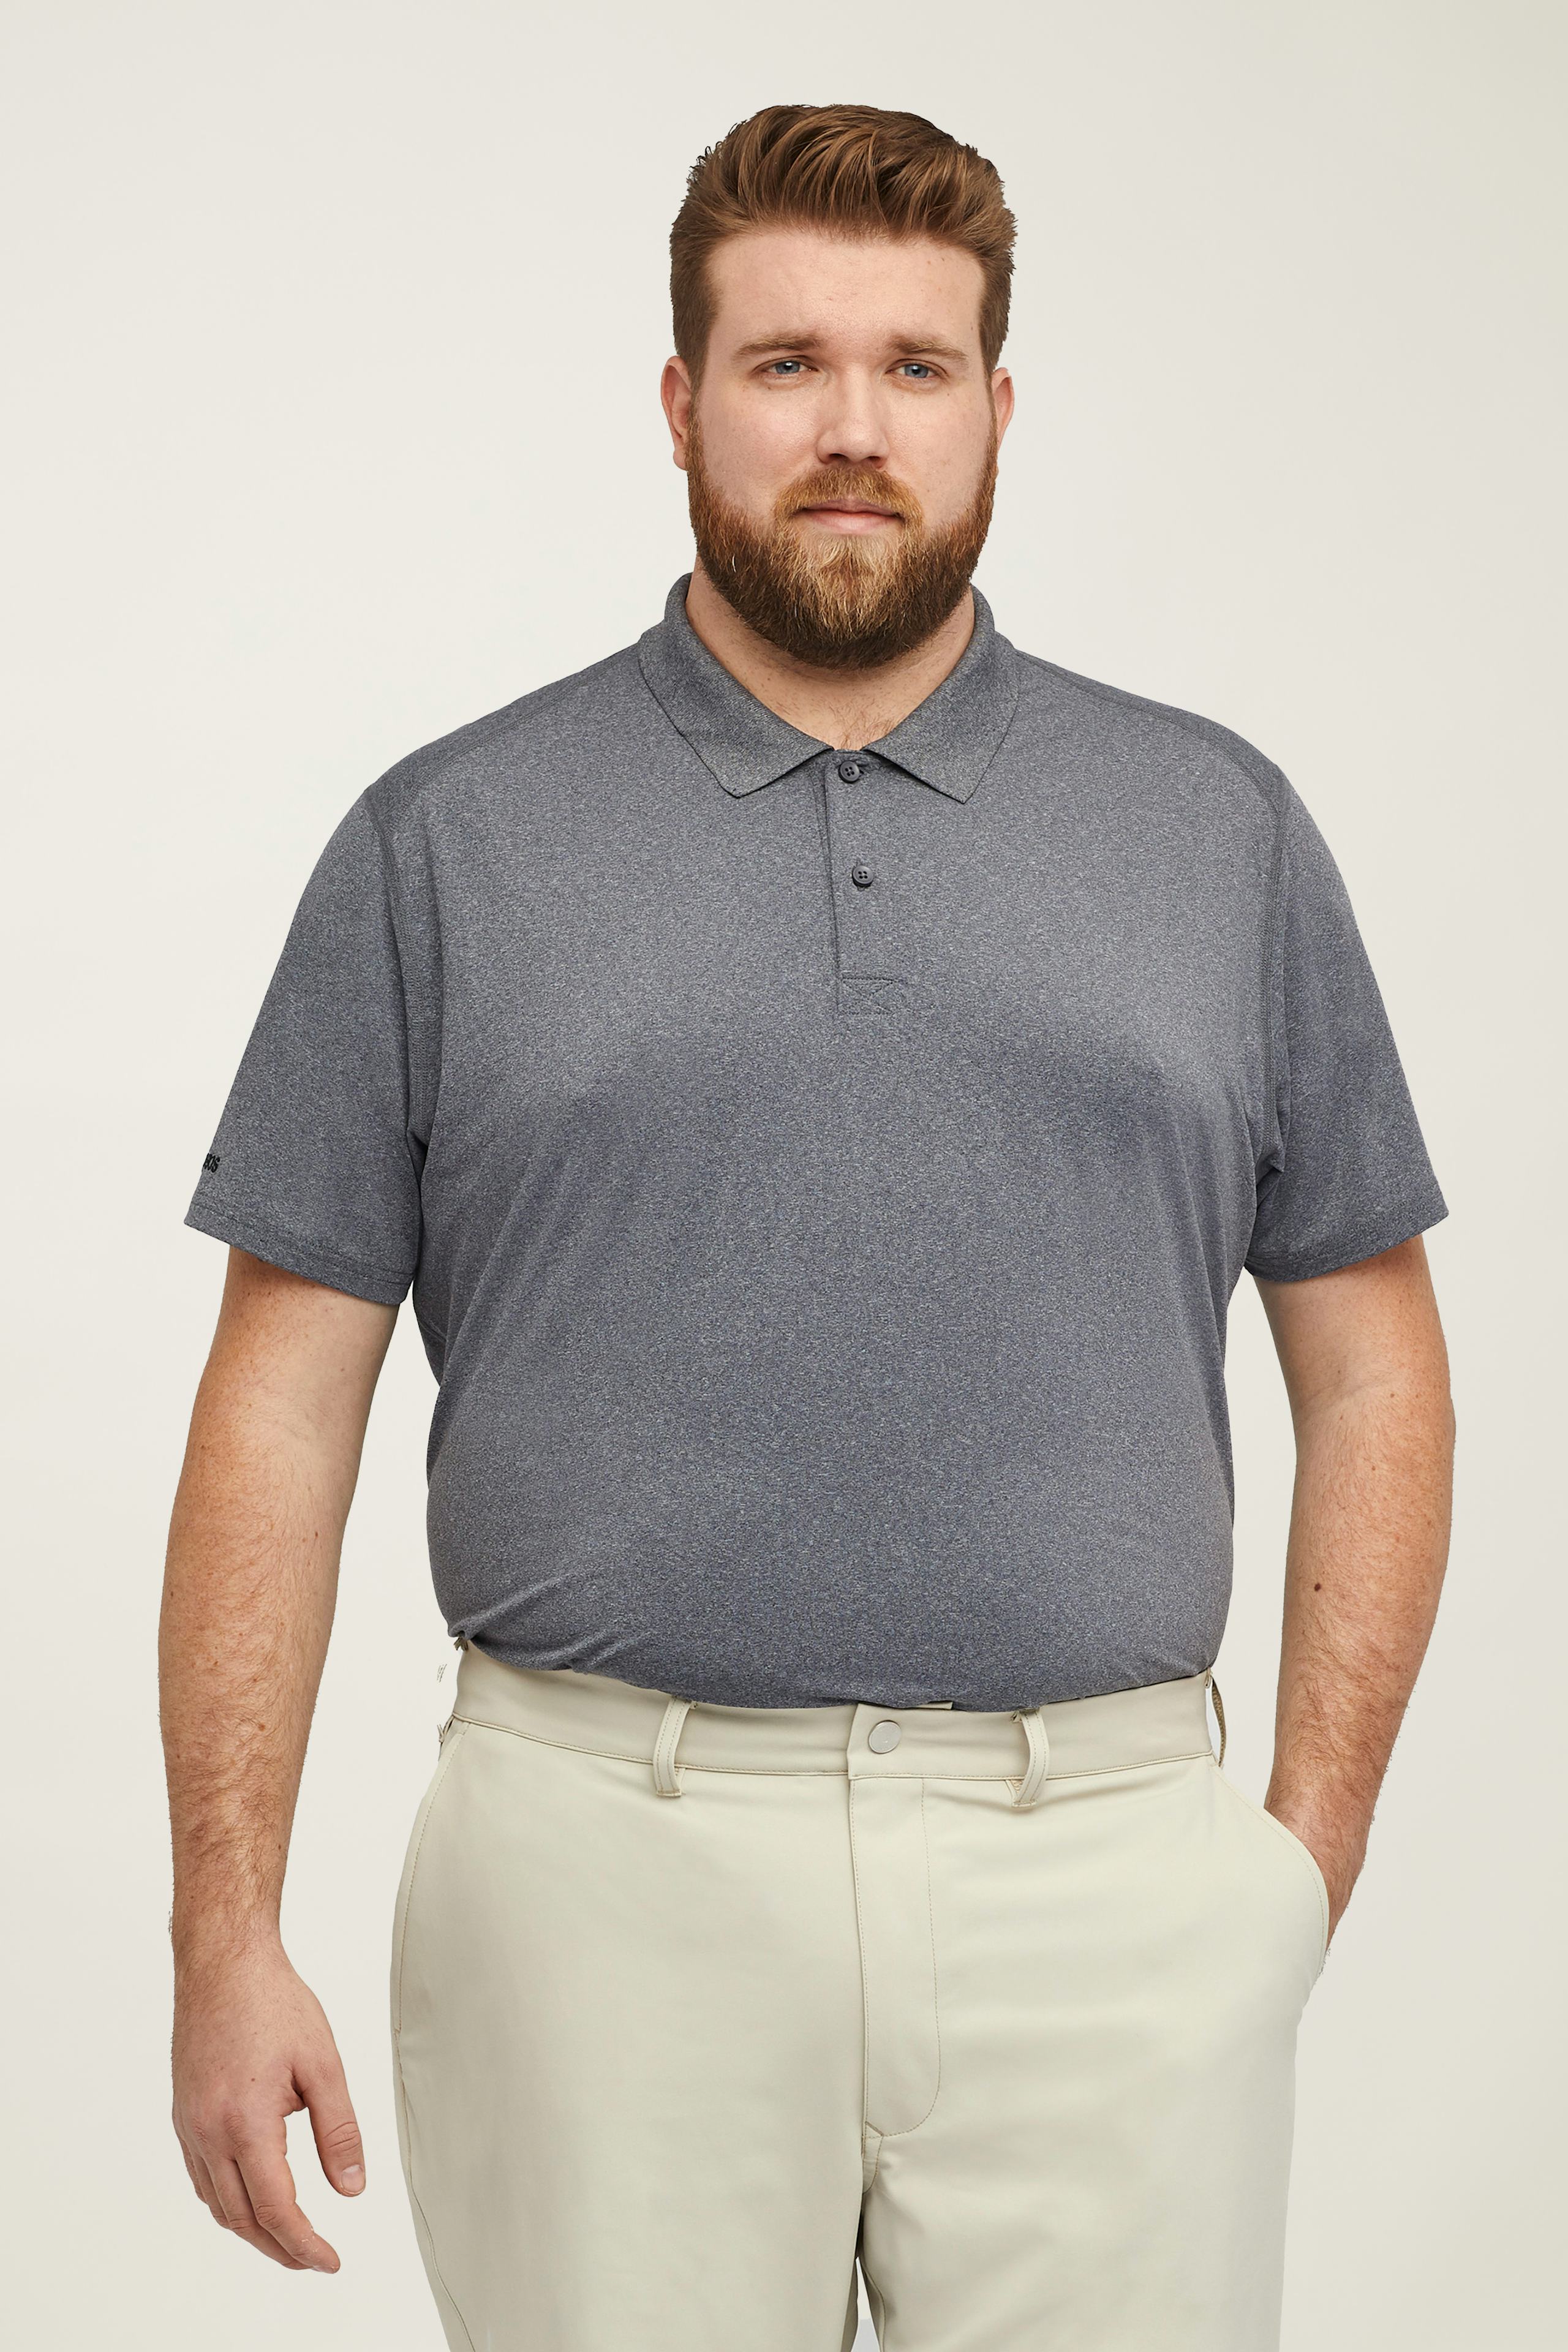 The M-Flex Golf Polo Extended Sizes